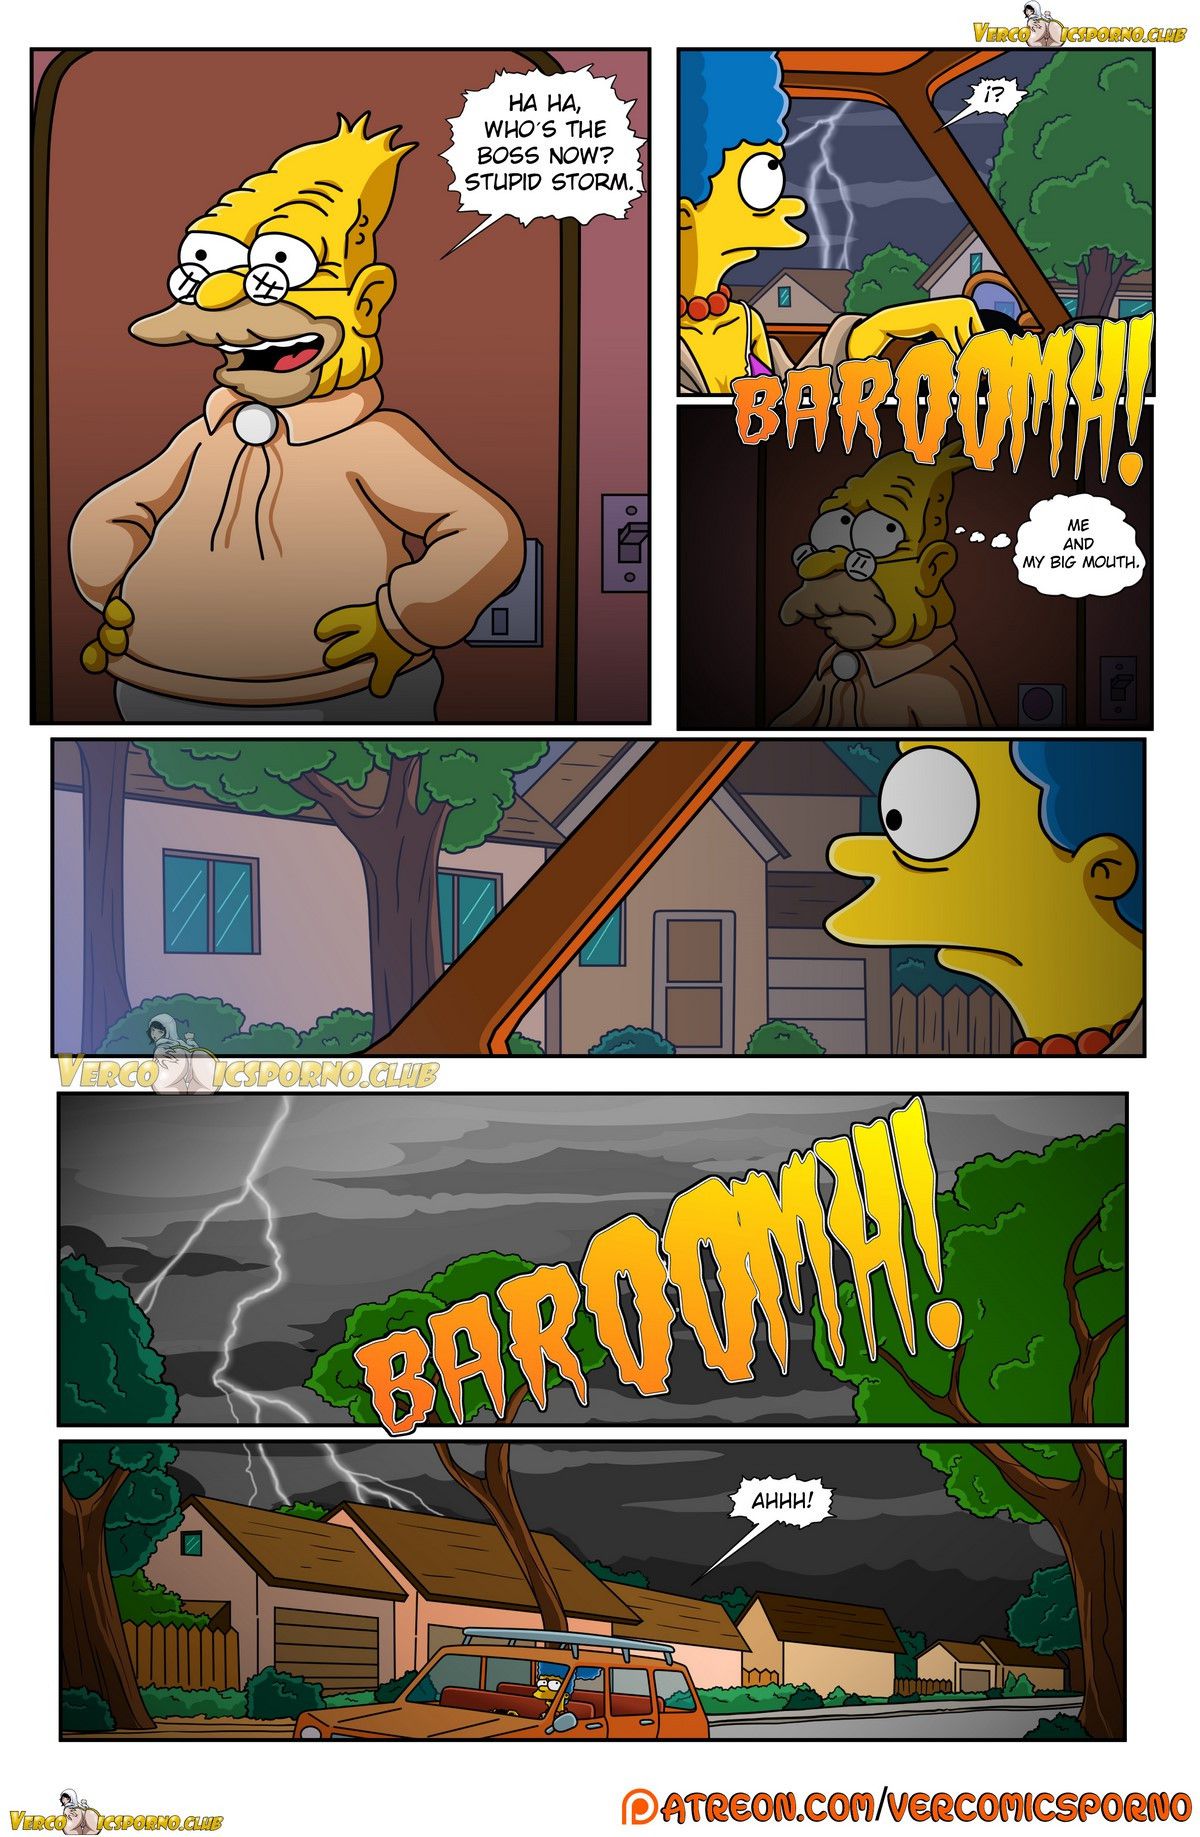 Grandpa and me - [Itooneaxxx] - [Drah Navlag] - [VCP] - [The Simpsons] 11